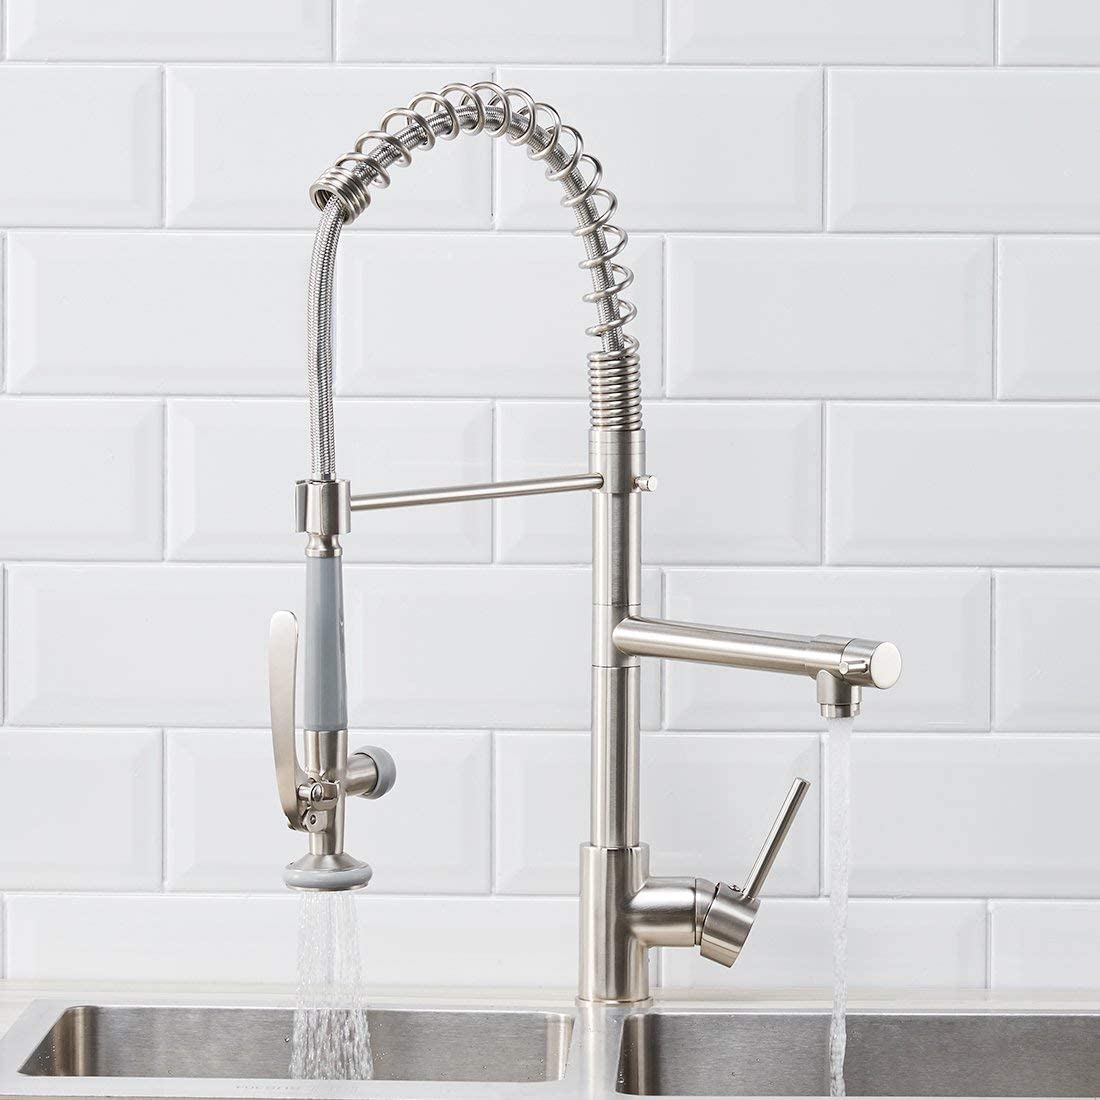  FLG Commercial Pull Down Kitchen Sink Faucet with Sprayer Brushed Nickel